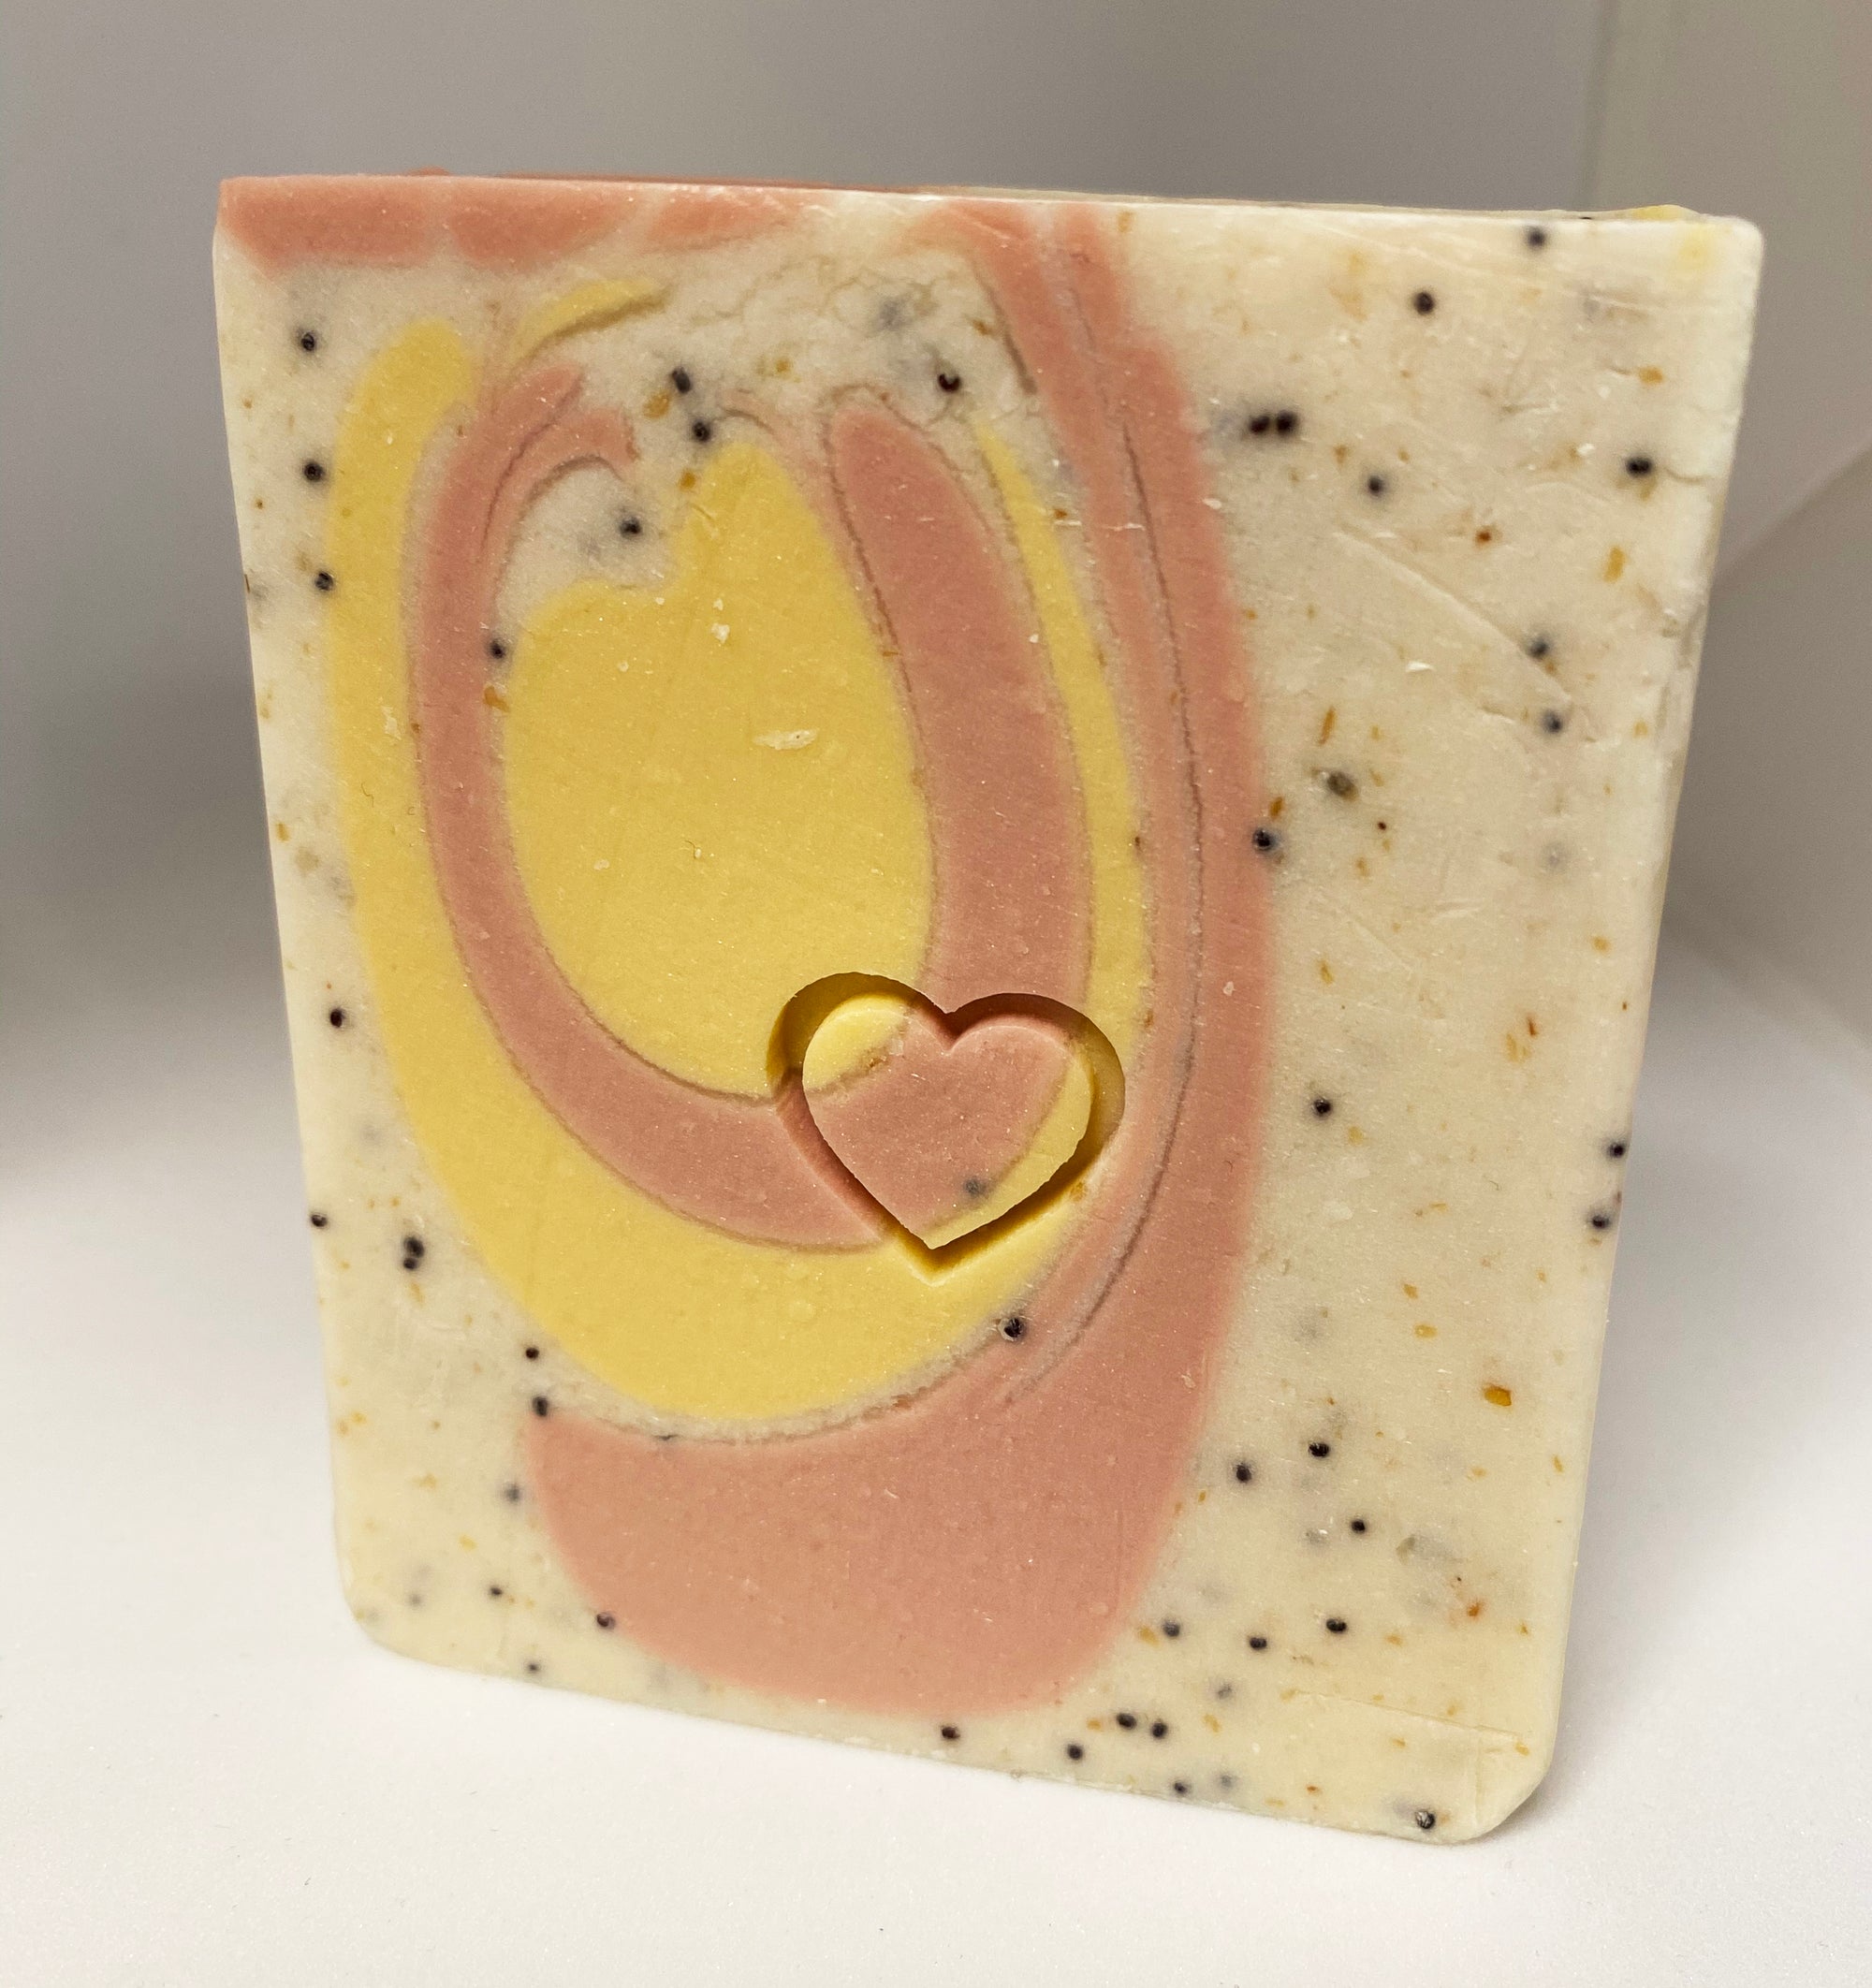 Mens Bar Soap Spearmint Basil Scrub - Heart and Home Gifts and Accessories